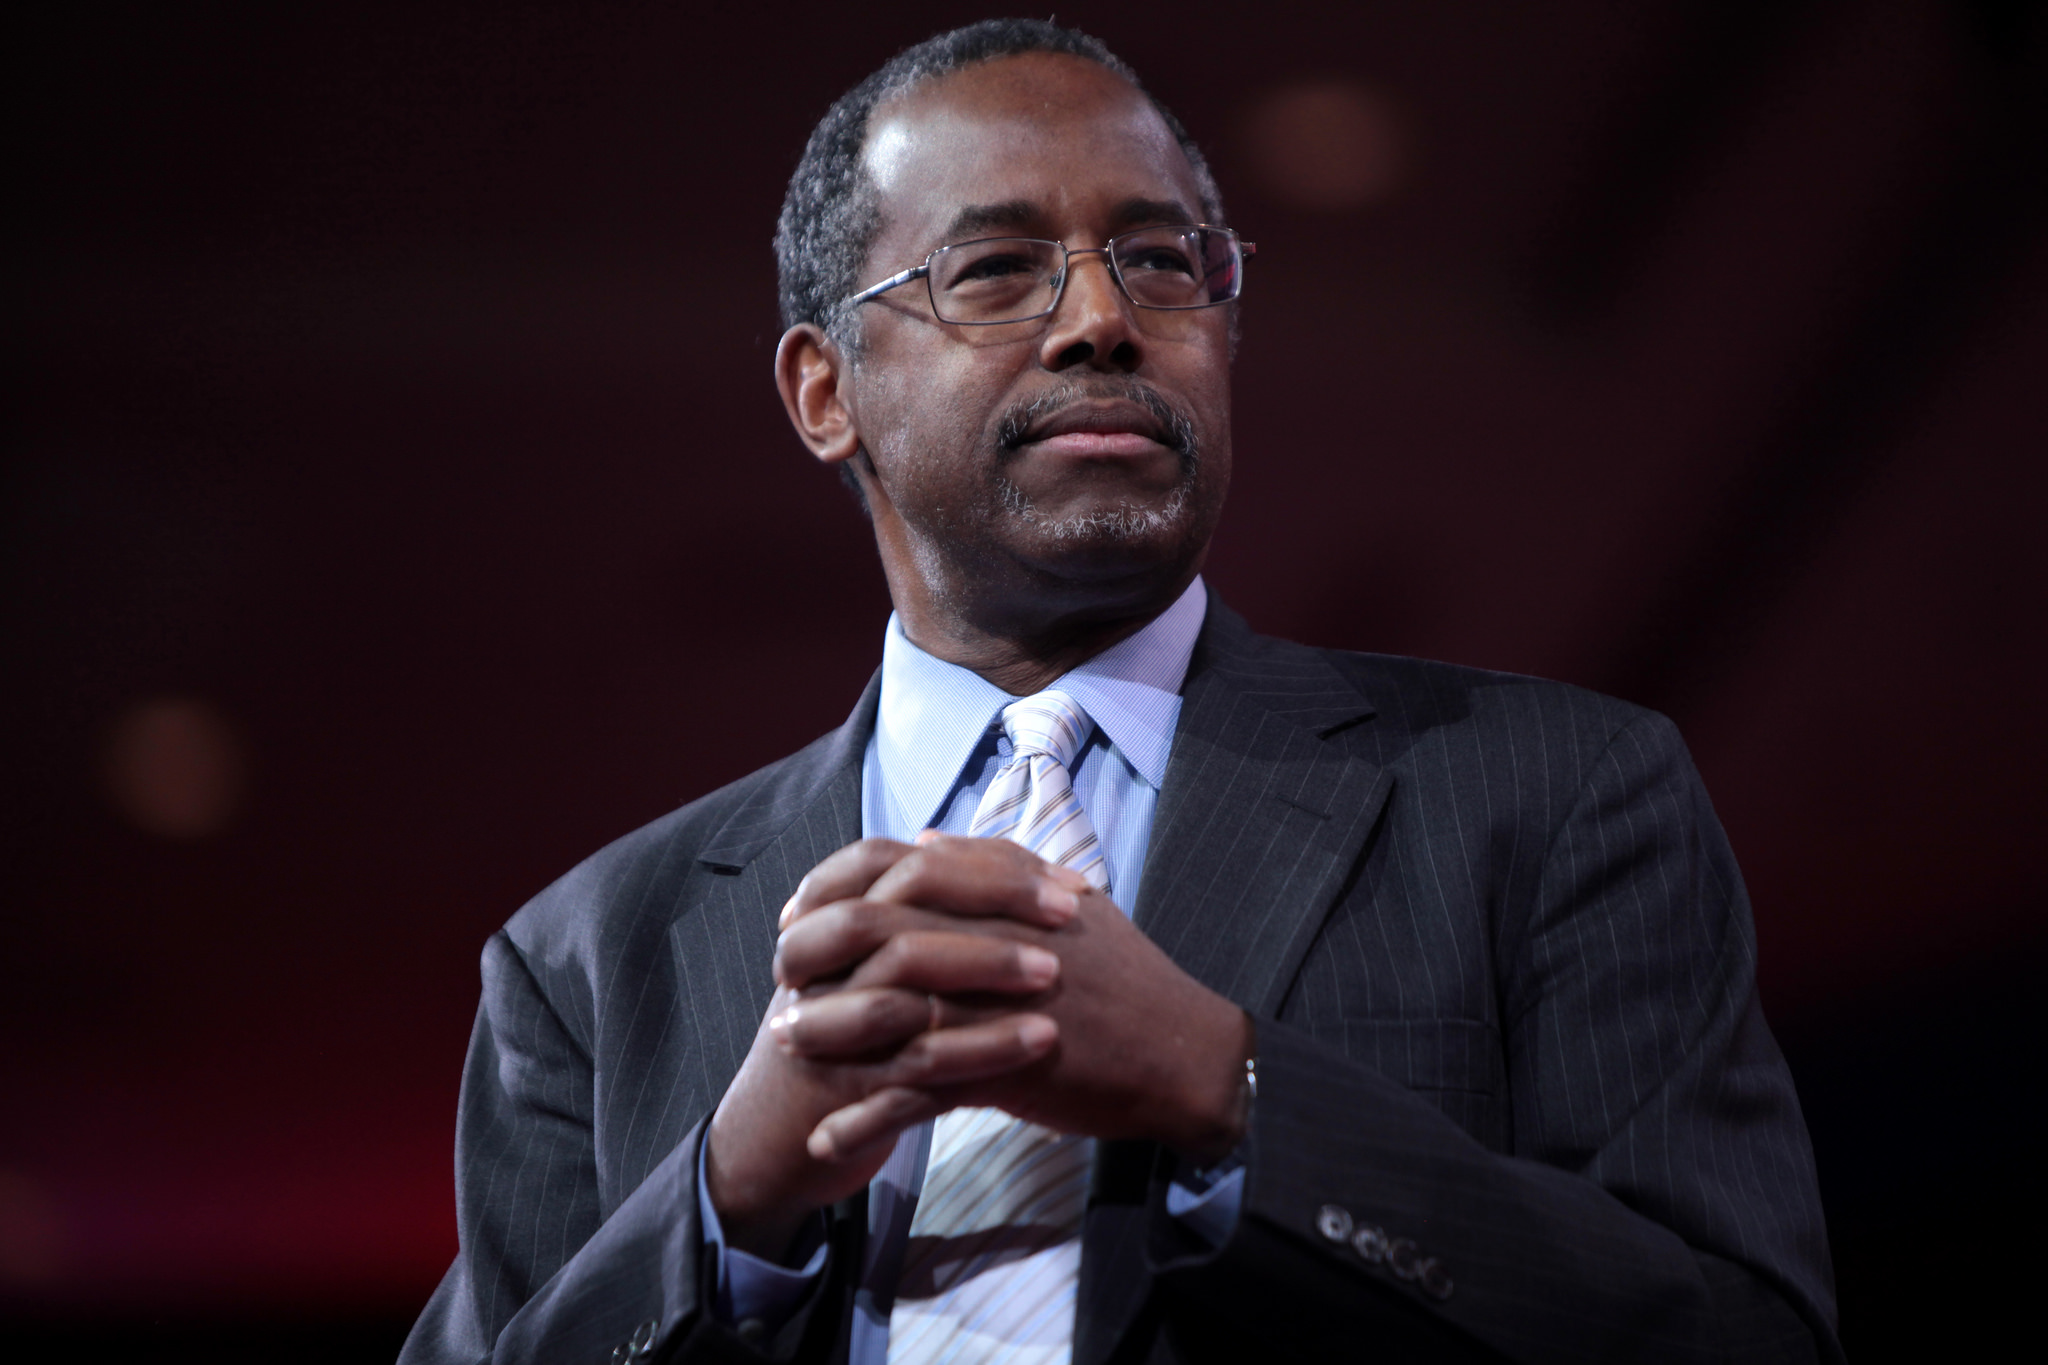 Ben Carson at the Conservative Political Action Conference in National Harbor, Md., in March (Gage Skidmore)